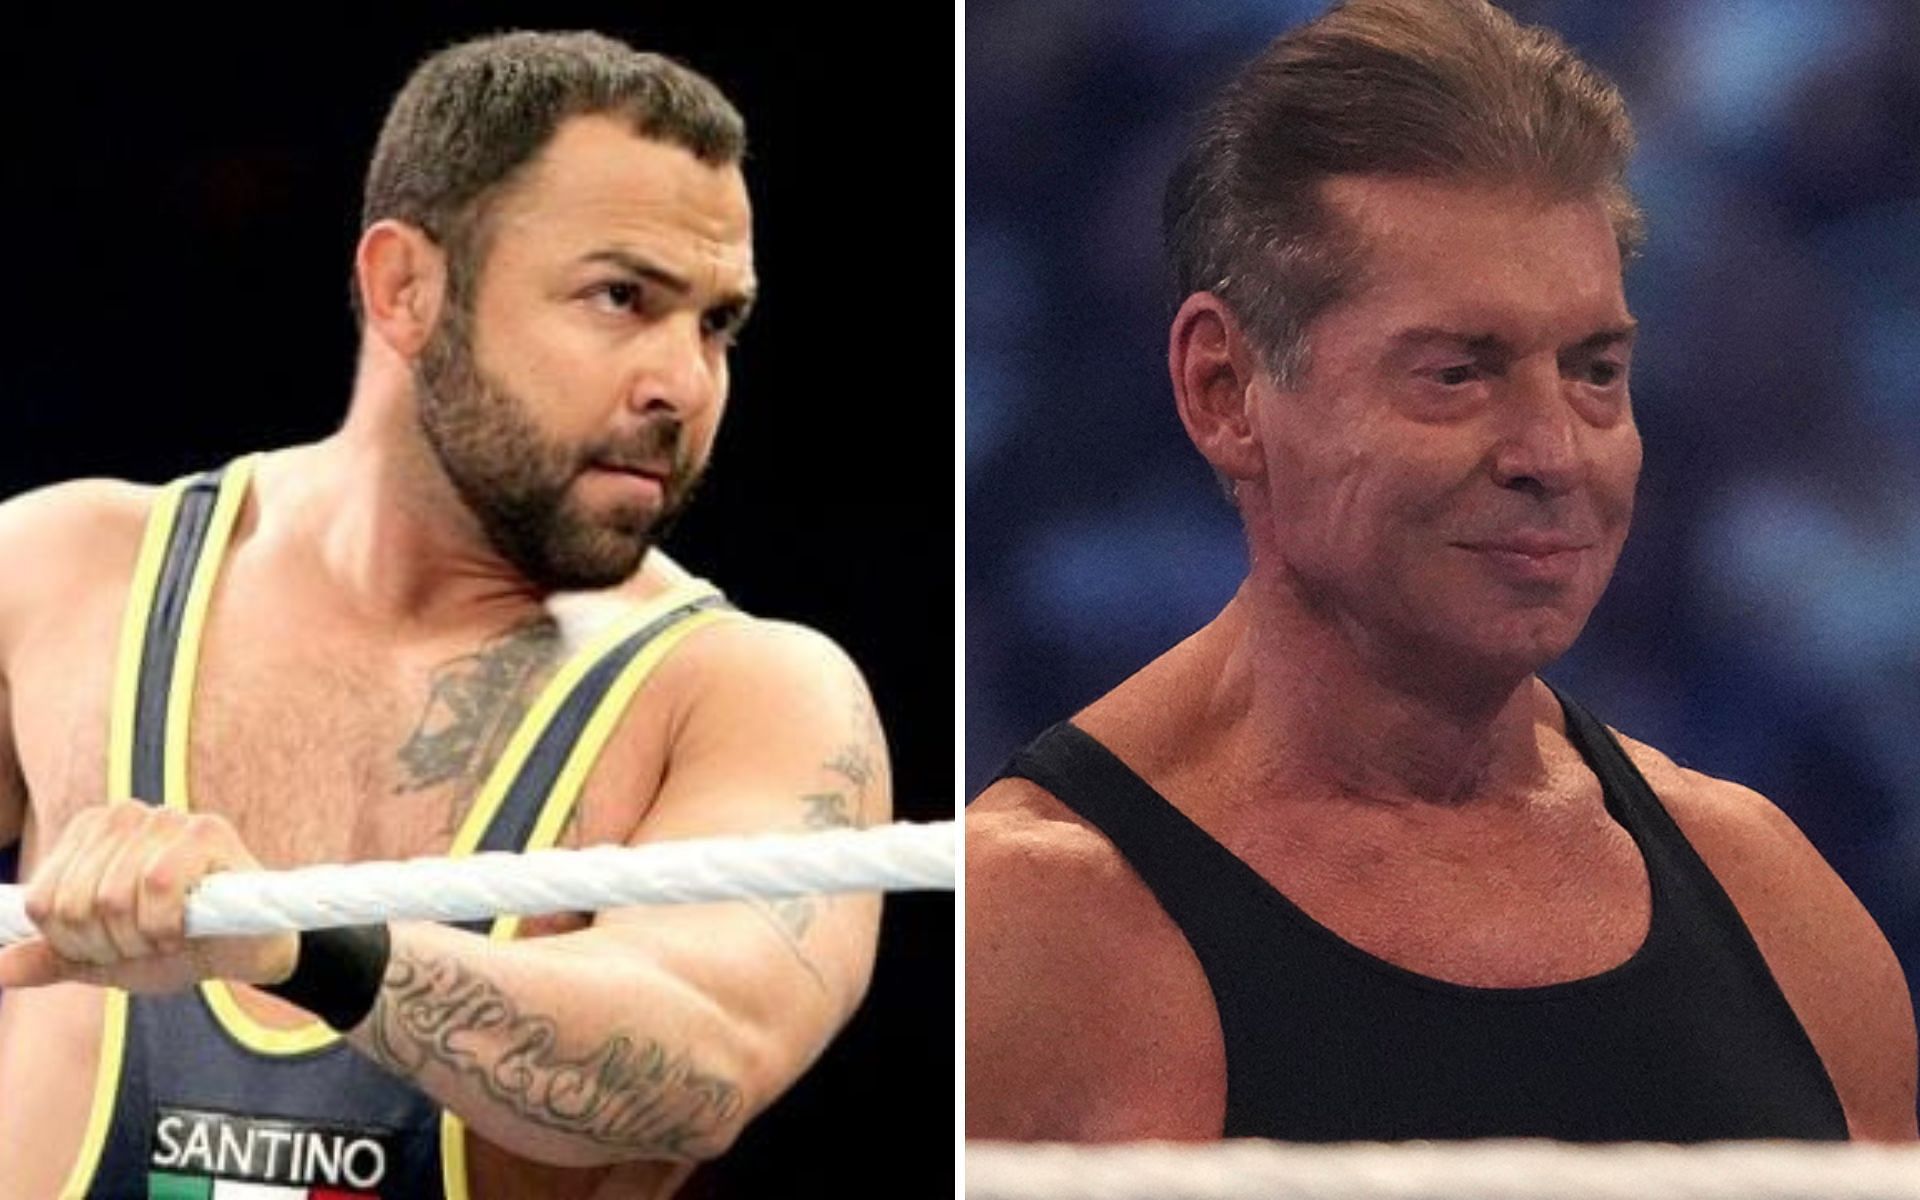 Vince McMahon was directly involved in Marella&#039;s iconic WWE debut